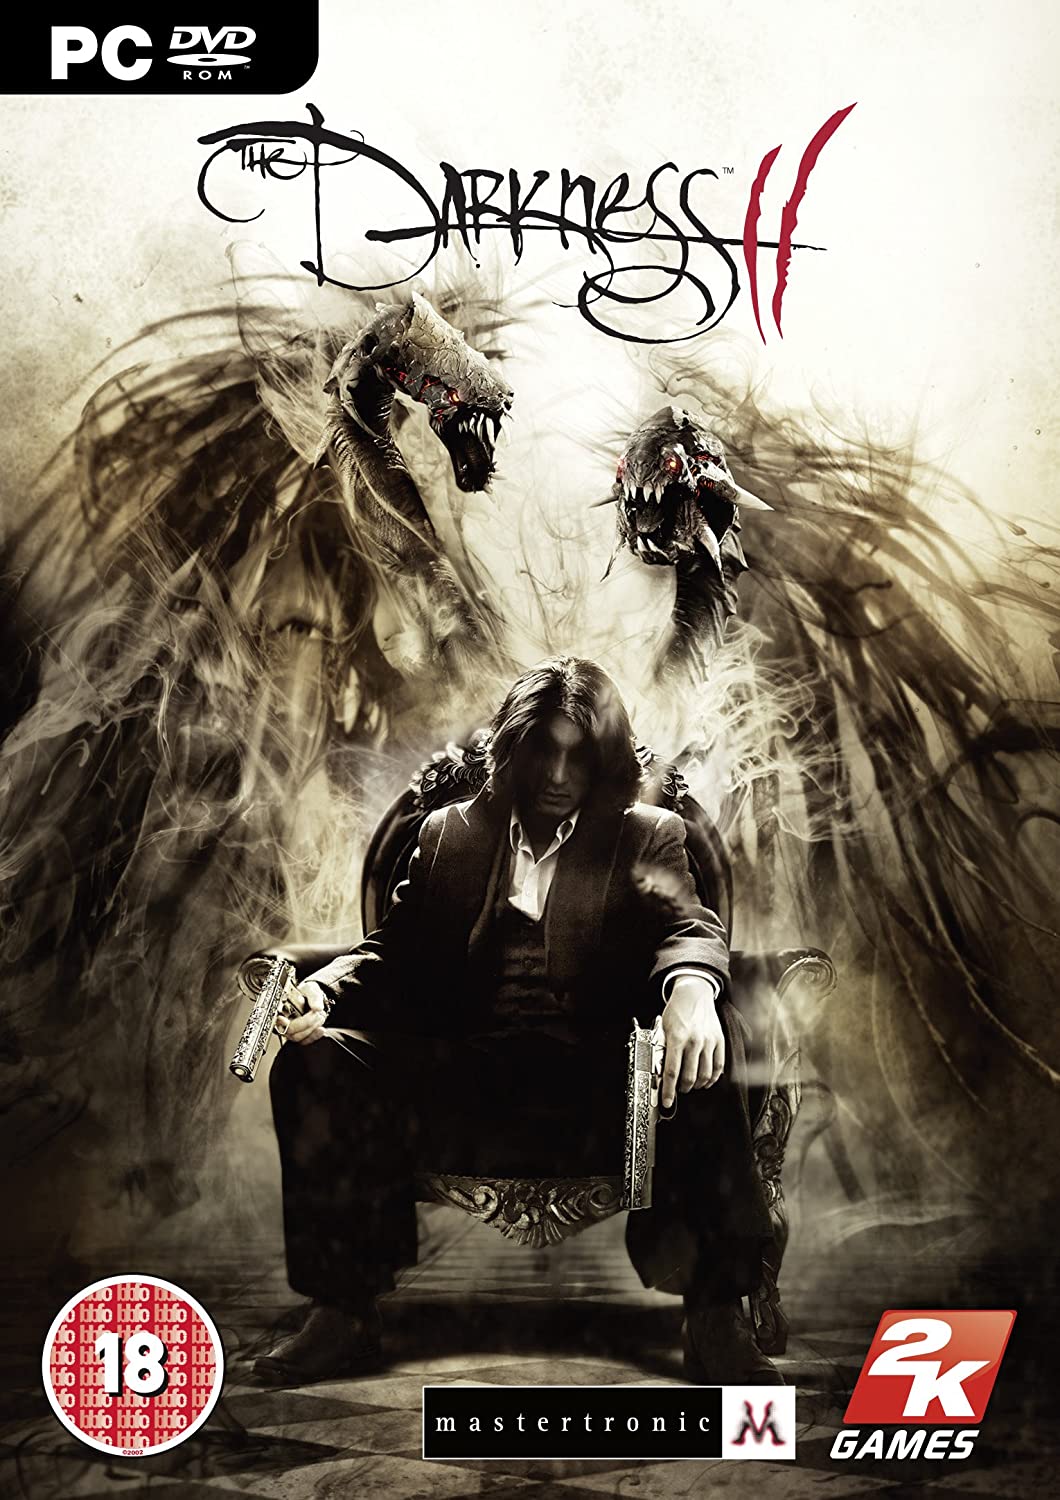 The Darkness 2 (PC-DVD)